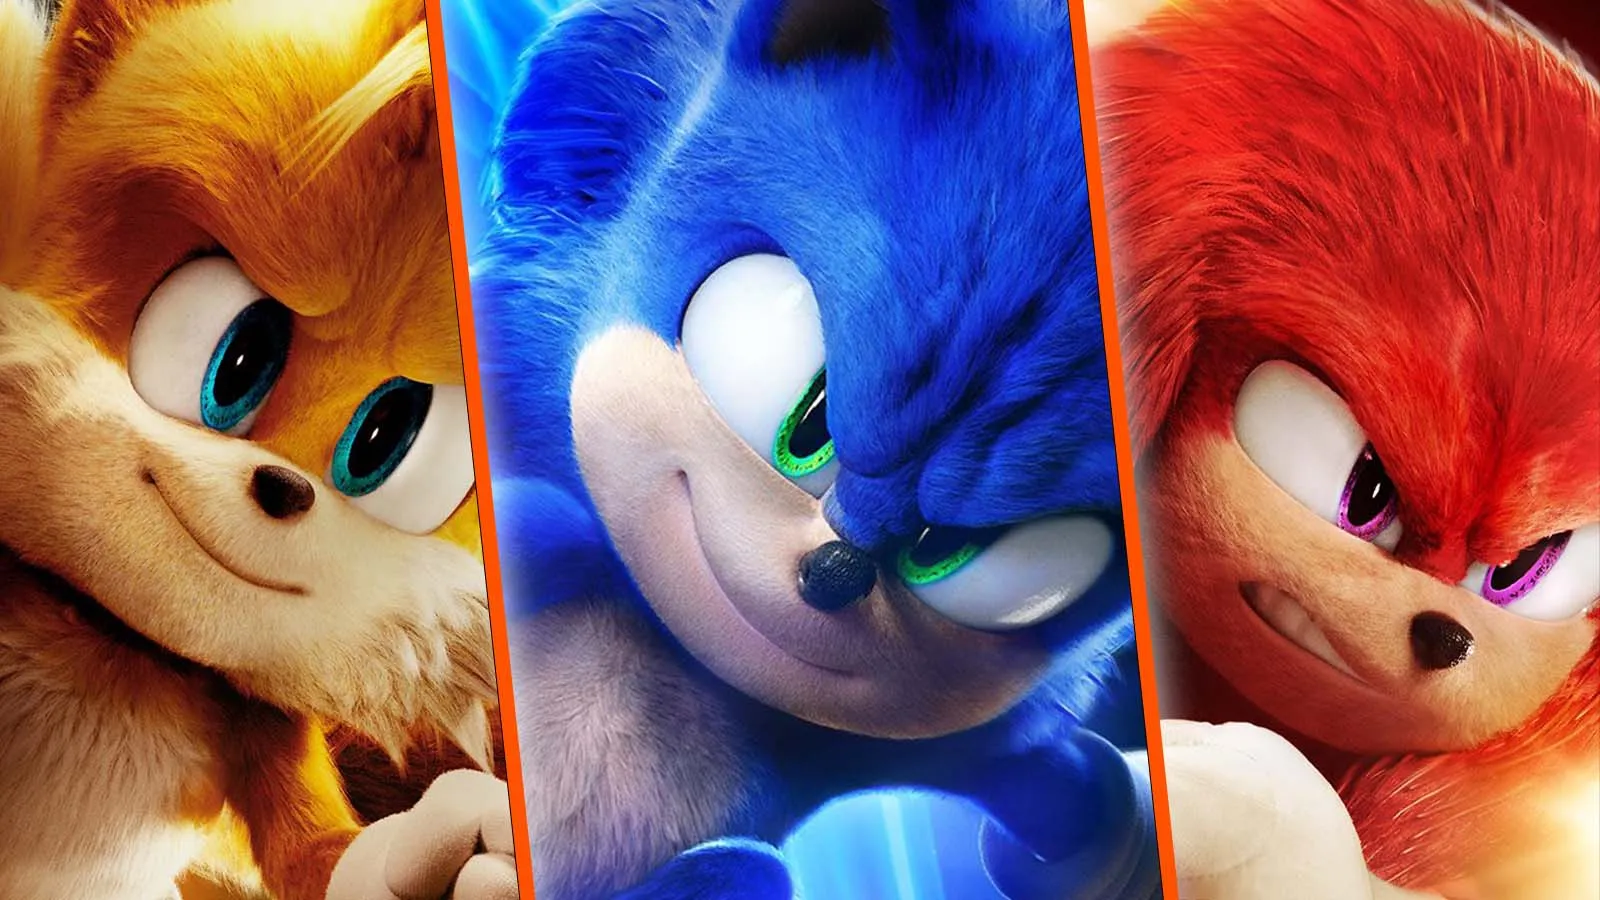 Sonic the Hedgehog' Lifts Paramount With Record-Setting Opening - WSJ